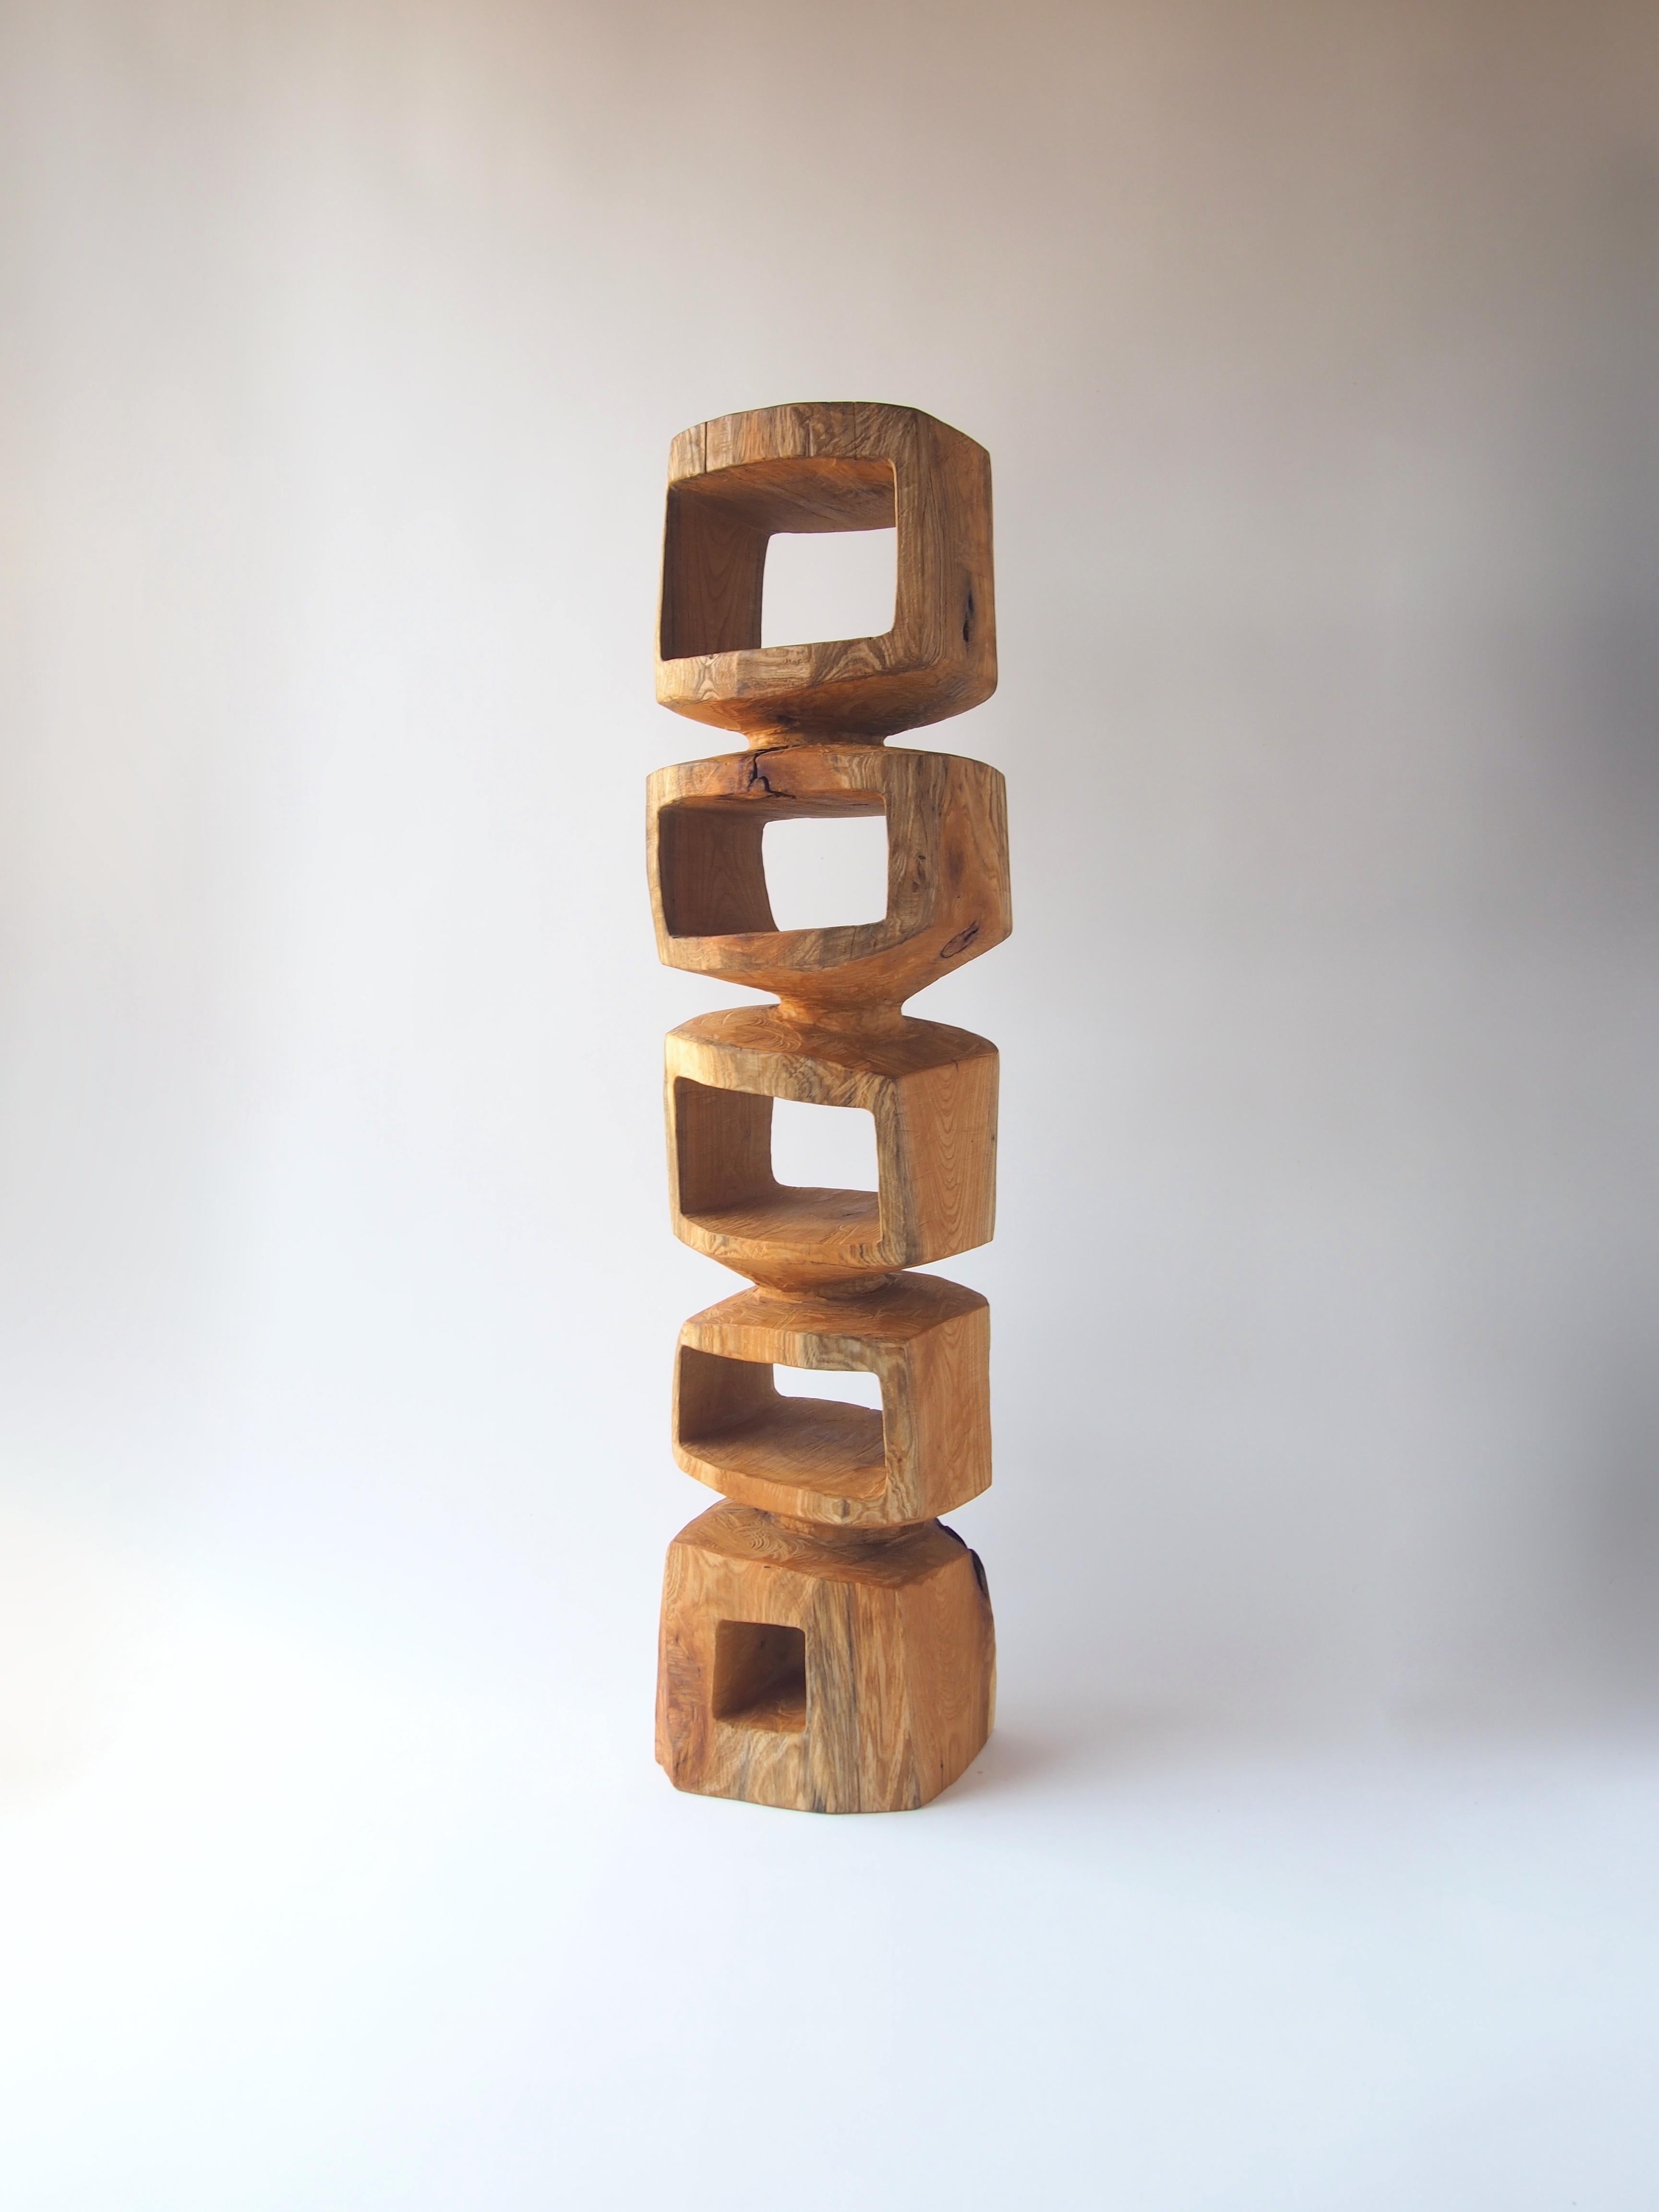 Name: Jenga
Sculptural stool by Zougei carved furniture
Material: Zelkova
This work is carved from log with some kinds of chainsaws.
Most of wood used for Nishimura's works are unable to use anything, these woods are unsuitable material for